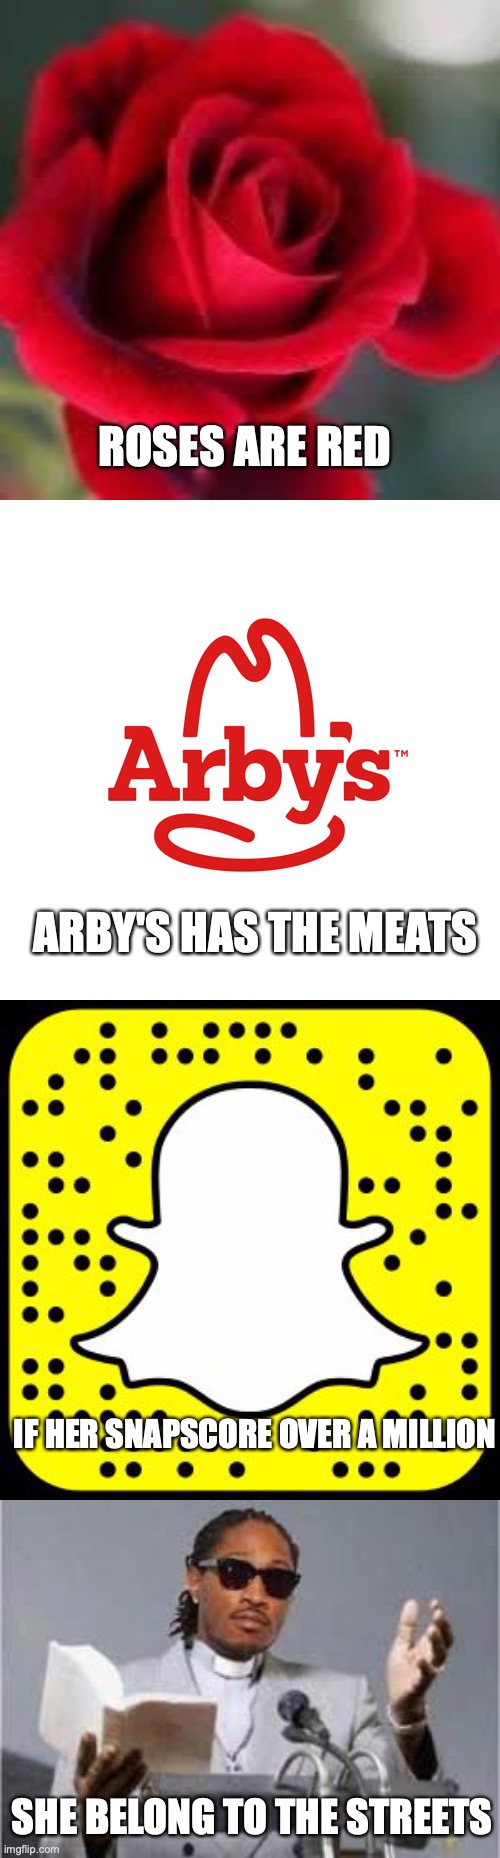 Wise words from a wiser man | ROSES ARE RED; ARBY'S HAS THE MEATS; IF HER SNAPSCORE OVER A MILLION; SHE BELONG TO THE STREETS | image tagged in snapchat,roses are red,arby's,she belong to the streets | made w/ Imgflip meme maker